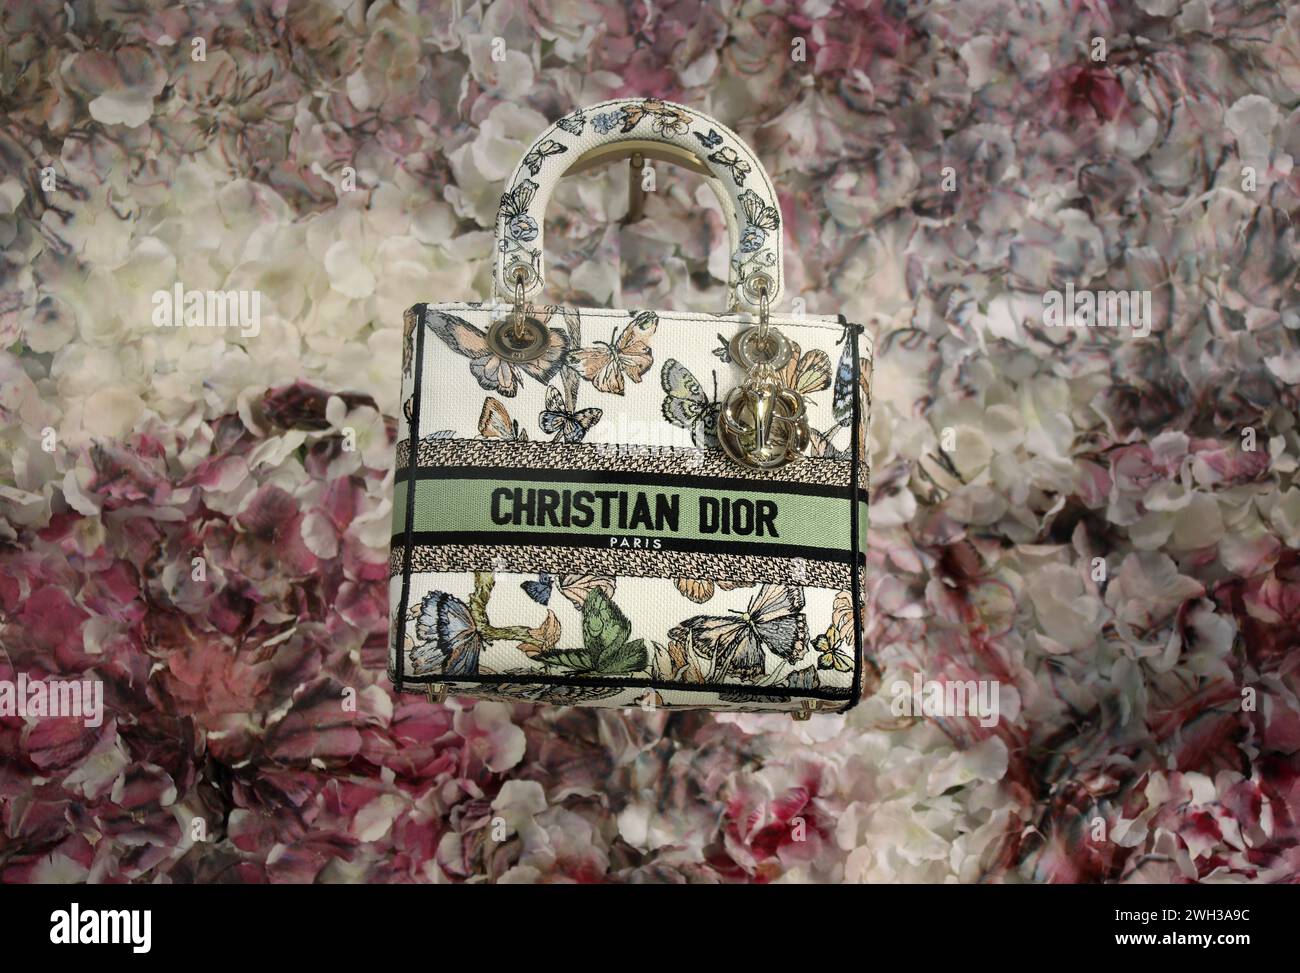 Christian Dior tote in a shop window Stock Photo